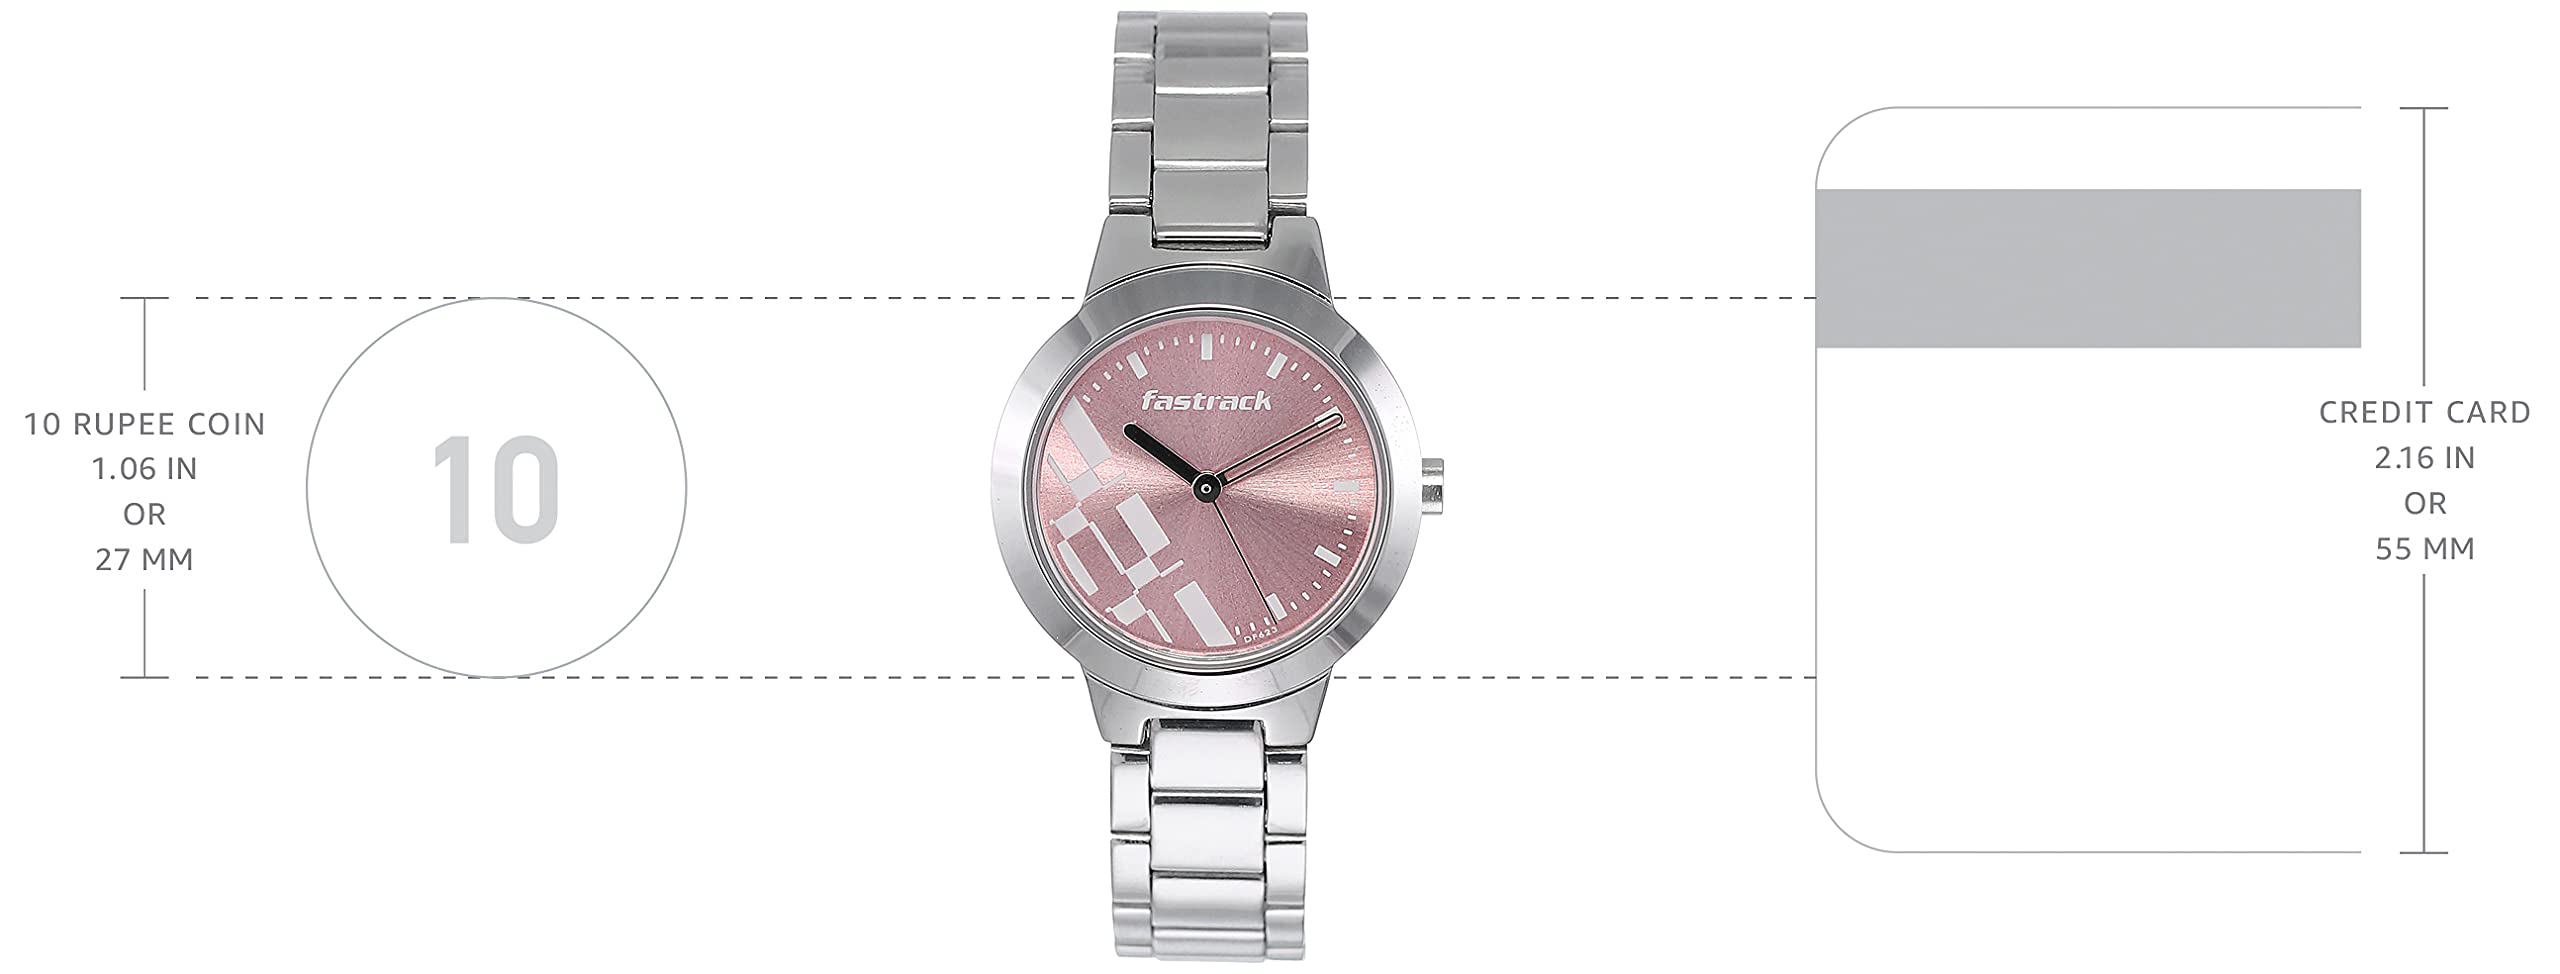 Fastrack Analog Pink Dial Women's Watch - 6150SM04